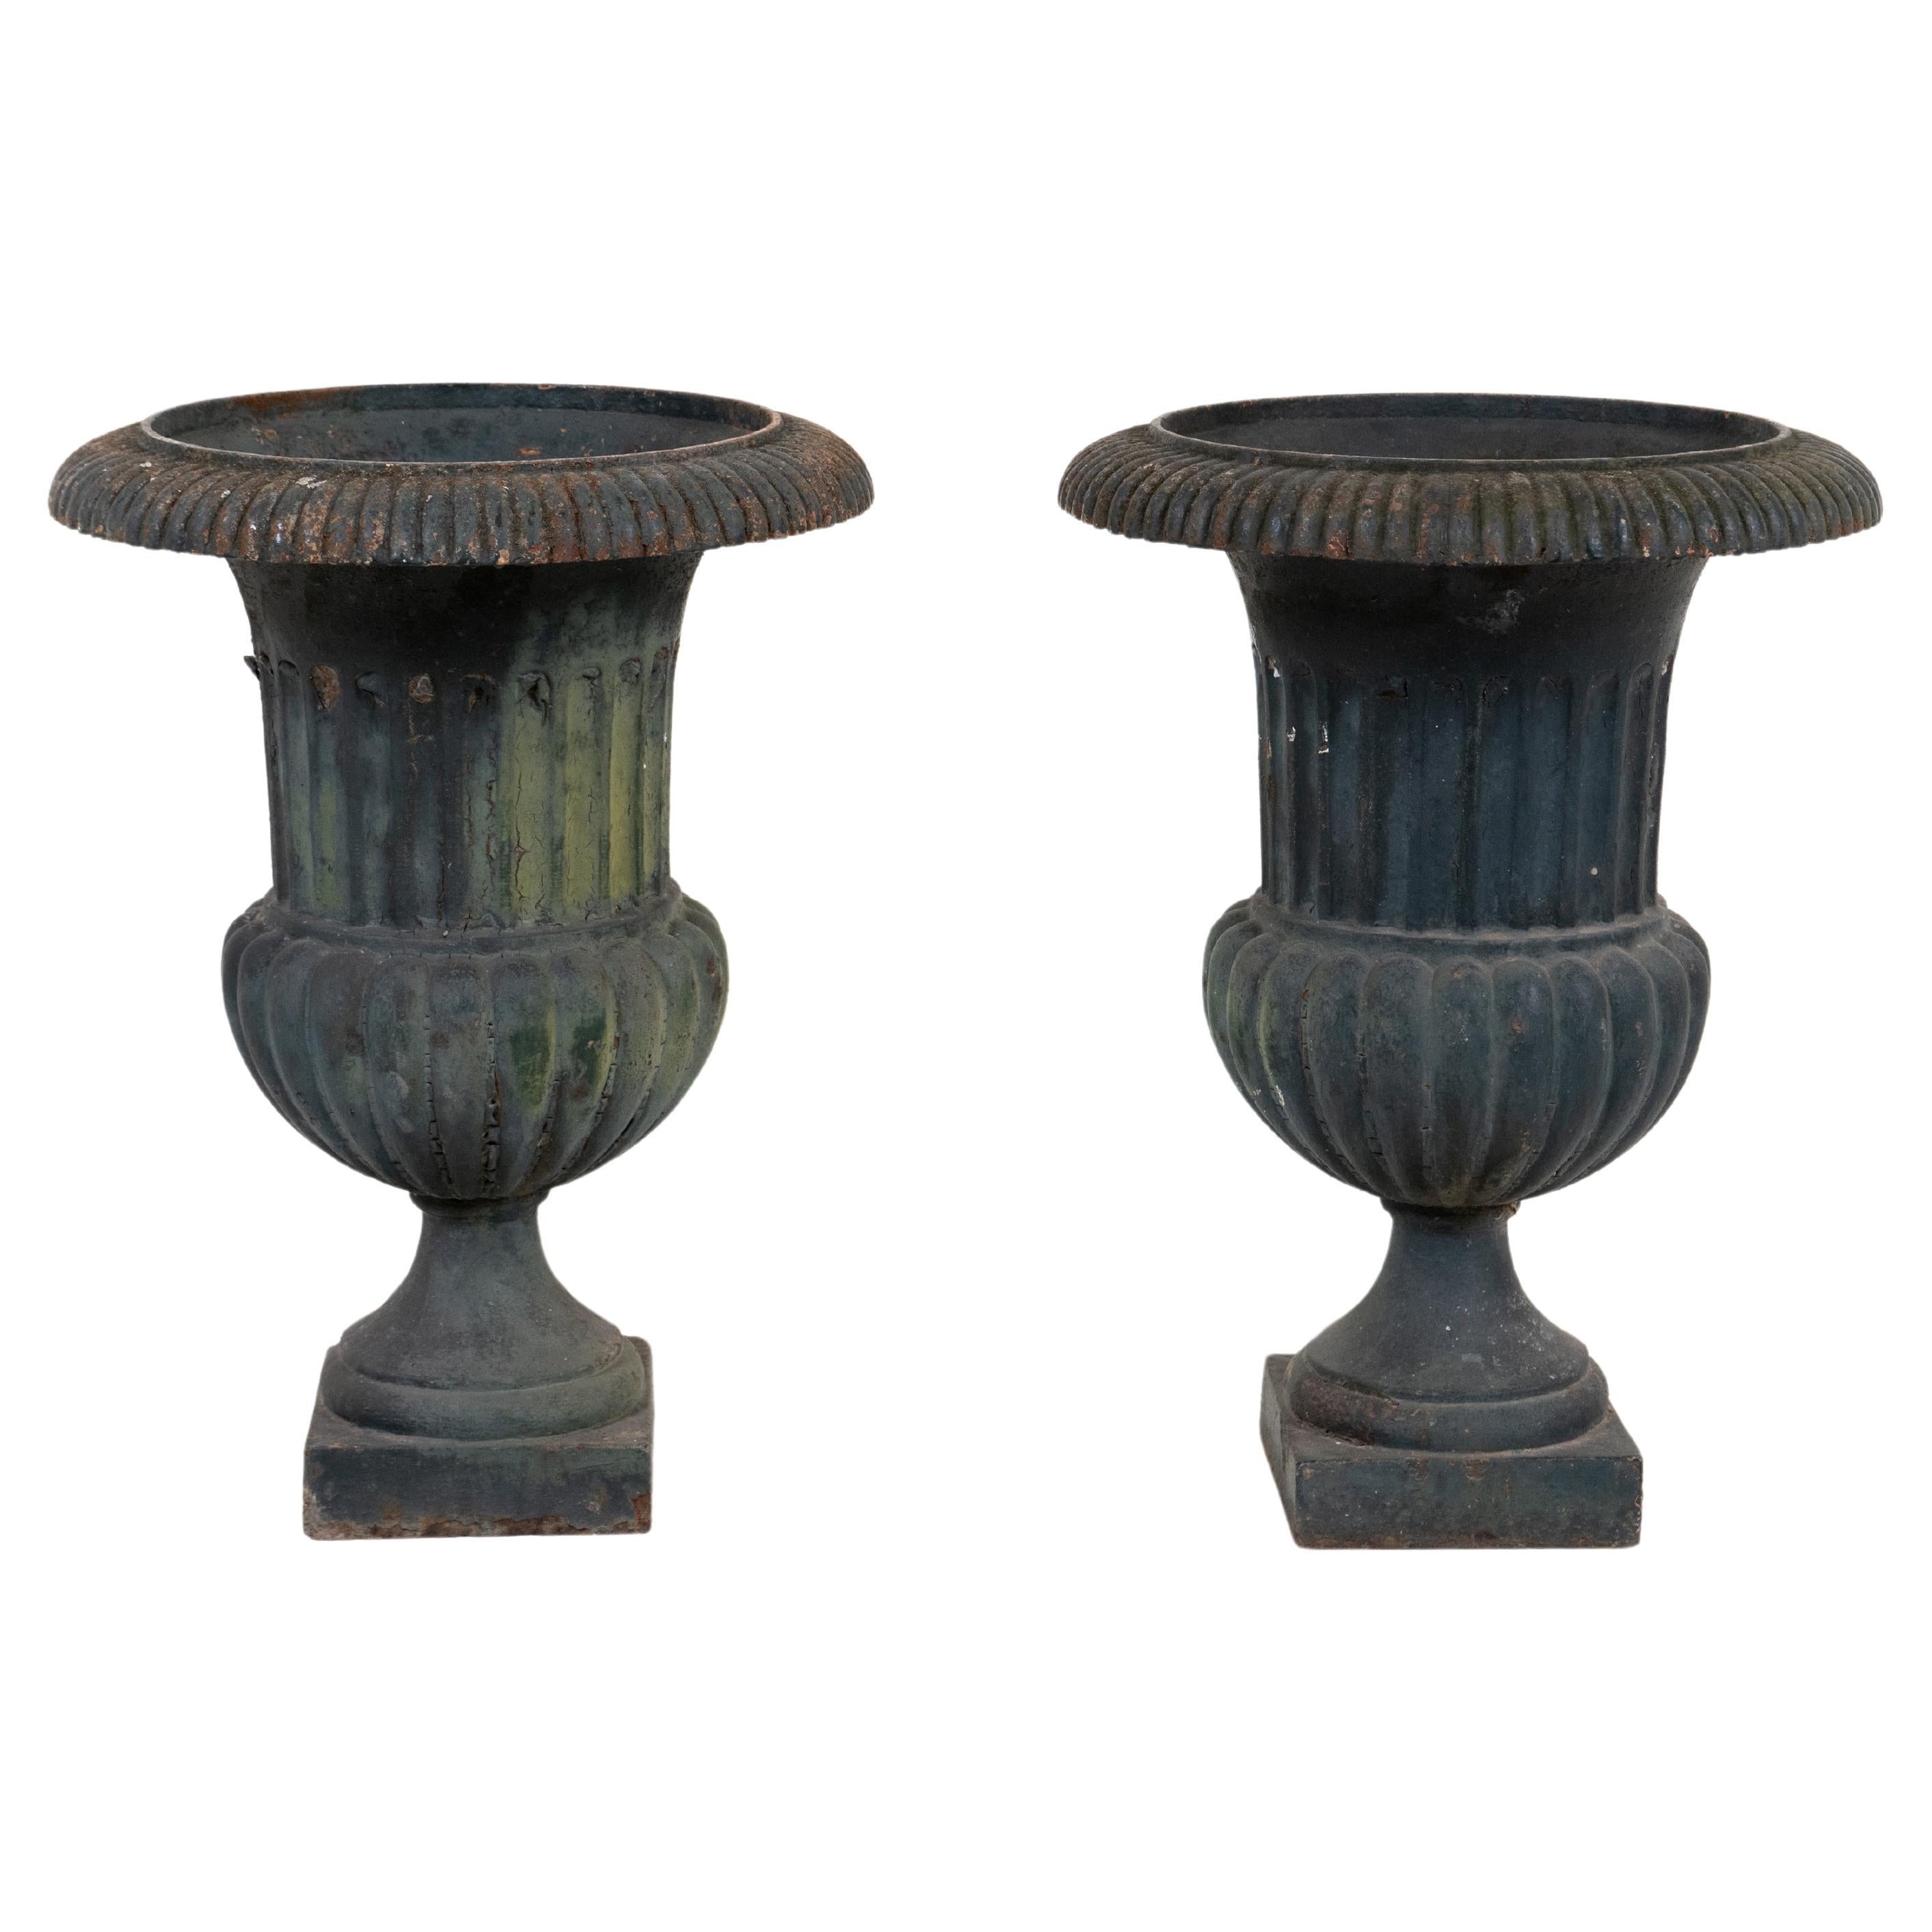 A Pair of Antique French Neoclassical Iron Garden Urns in Black